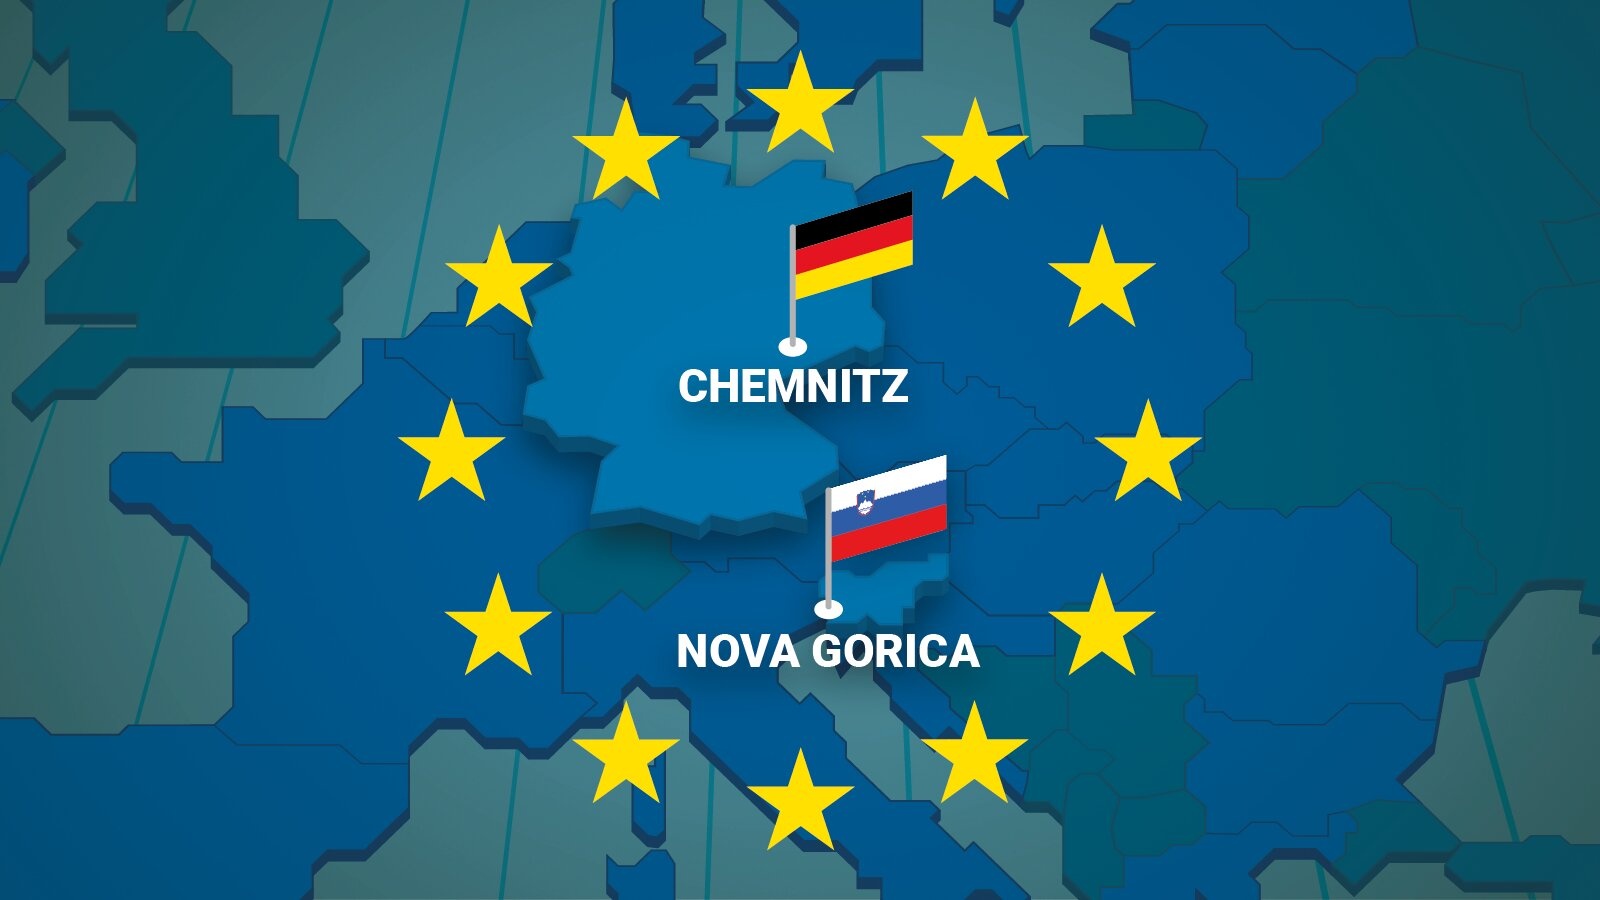 University of Nova Gorica and Chemnitz University of Technology are Universities of the Capitals of Culture 2025 and want to cooperate closely in the future. Graphic: Jacob Müller